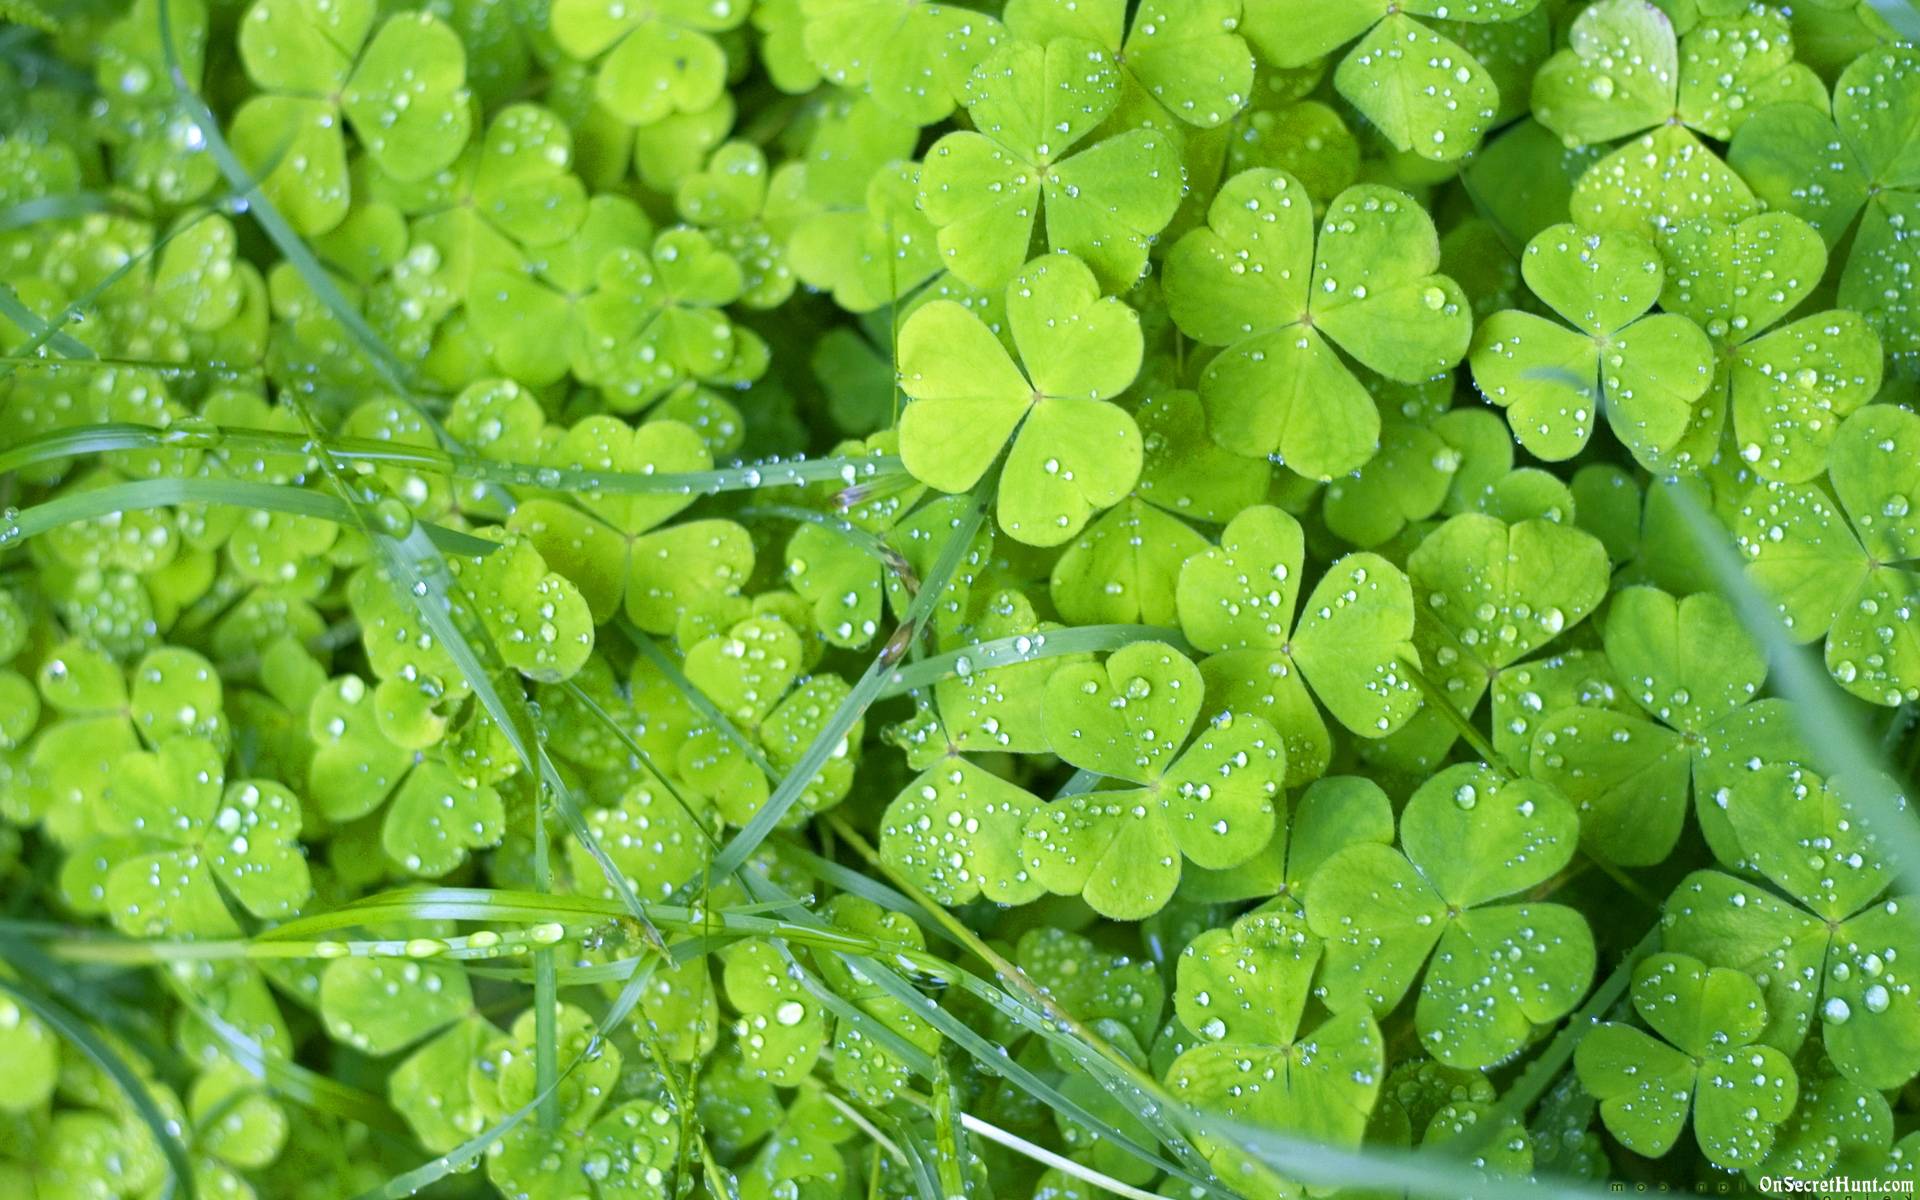 Green Flowers Wallpapers